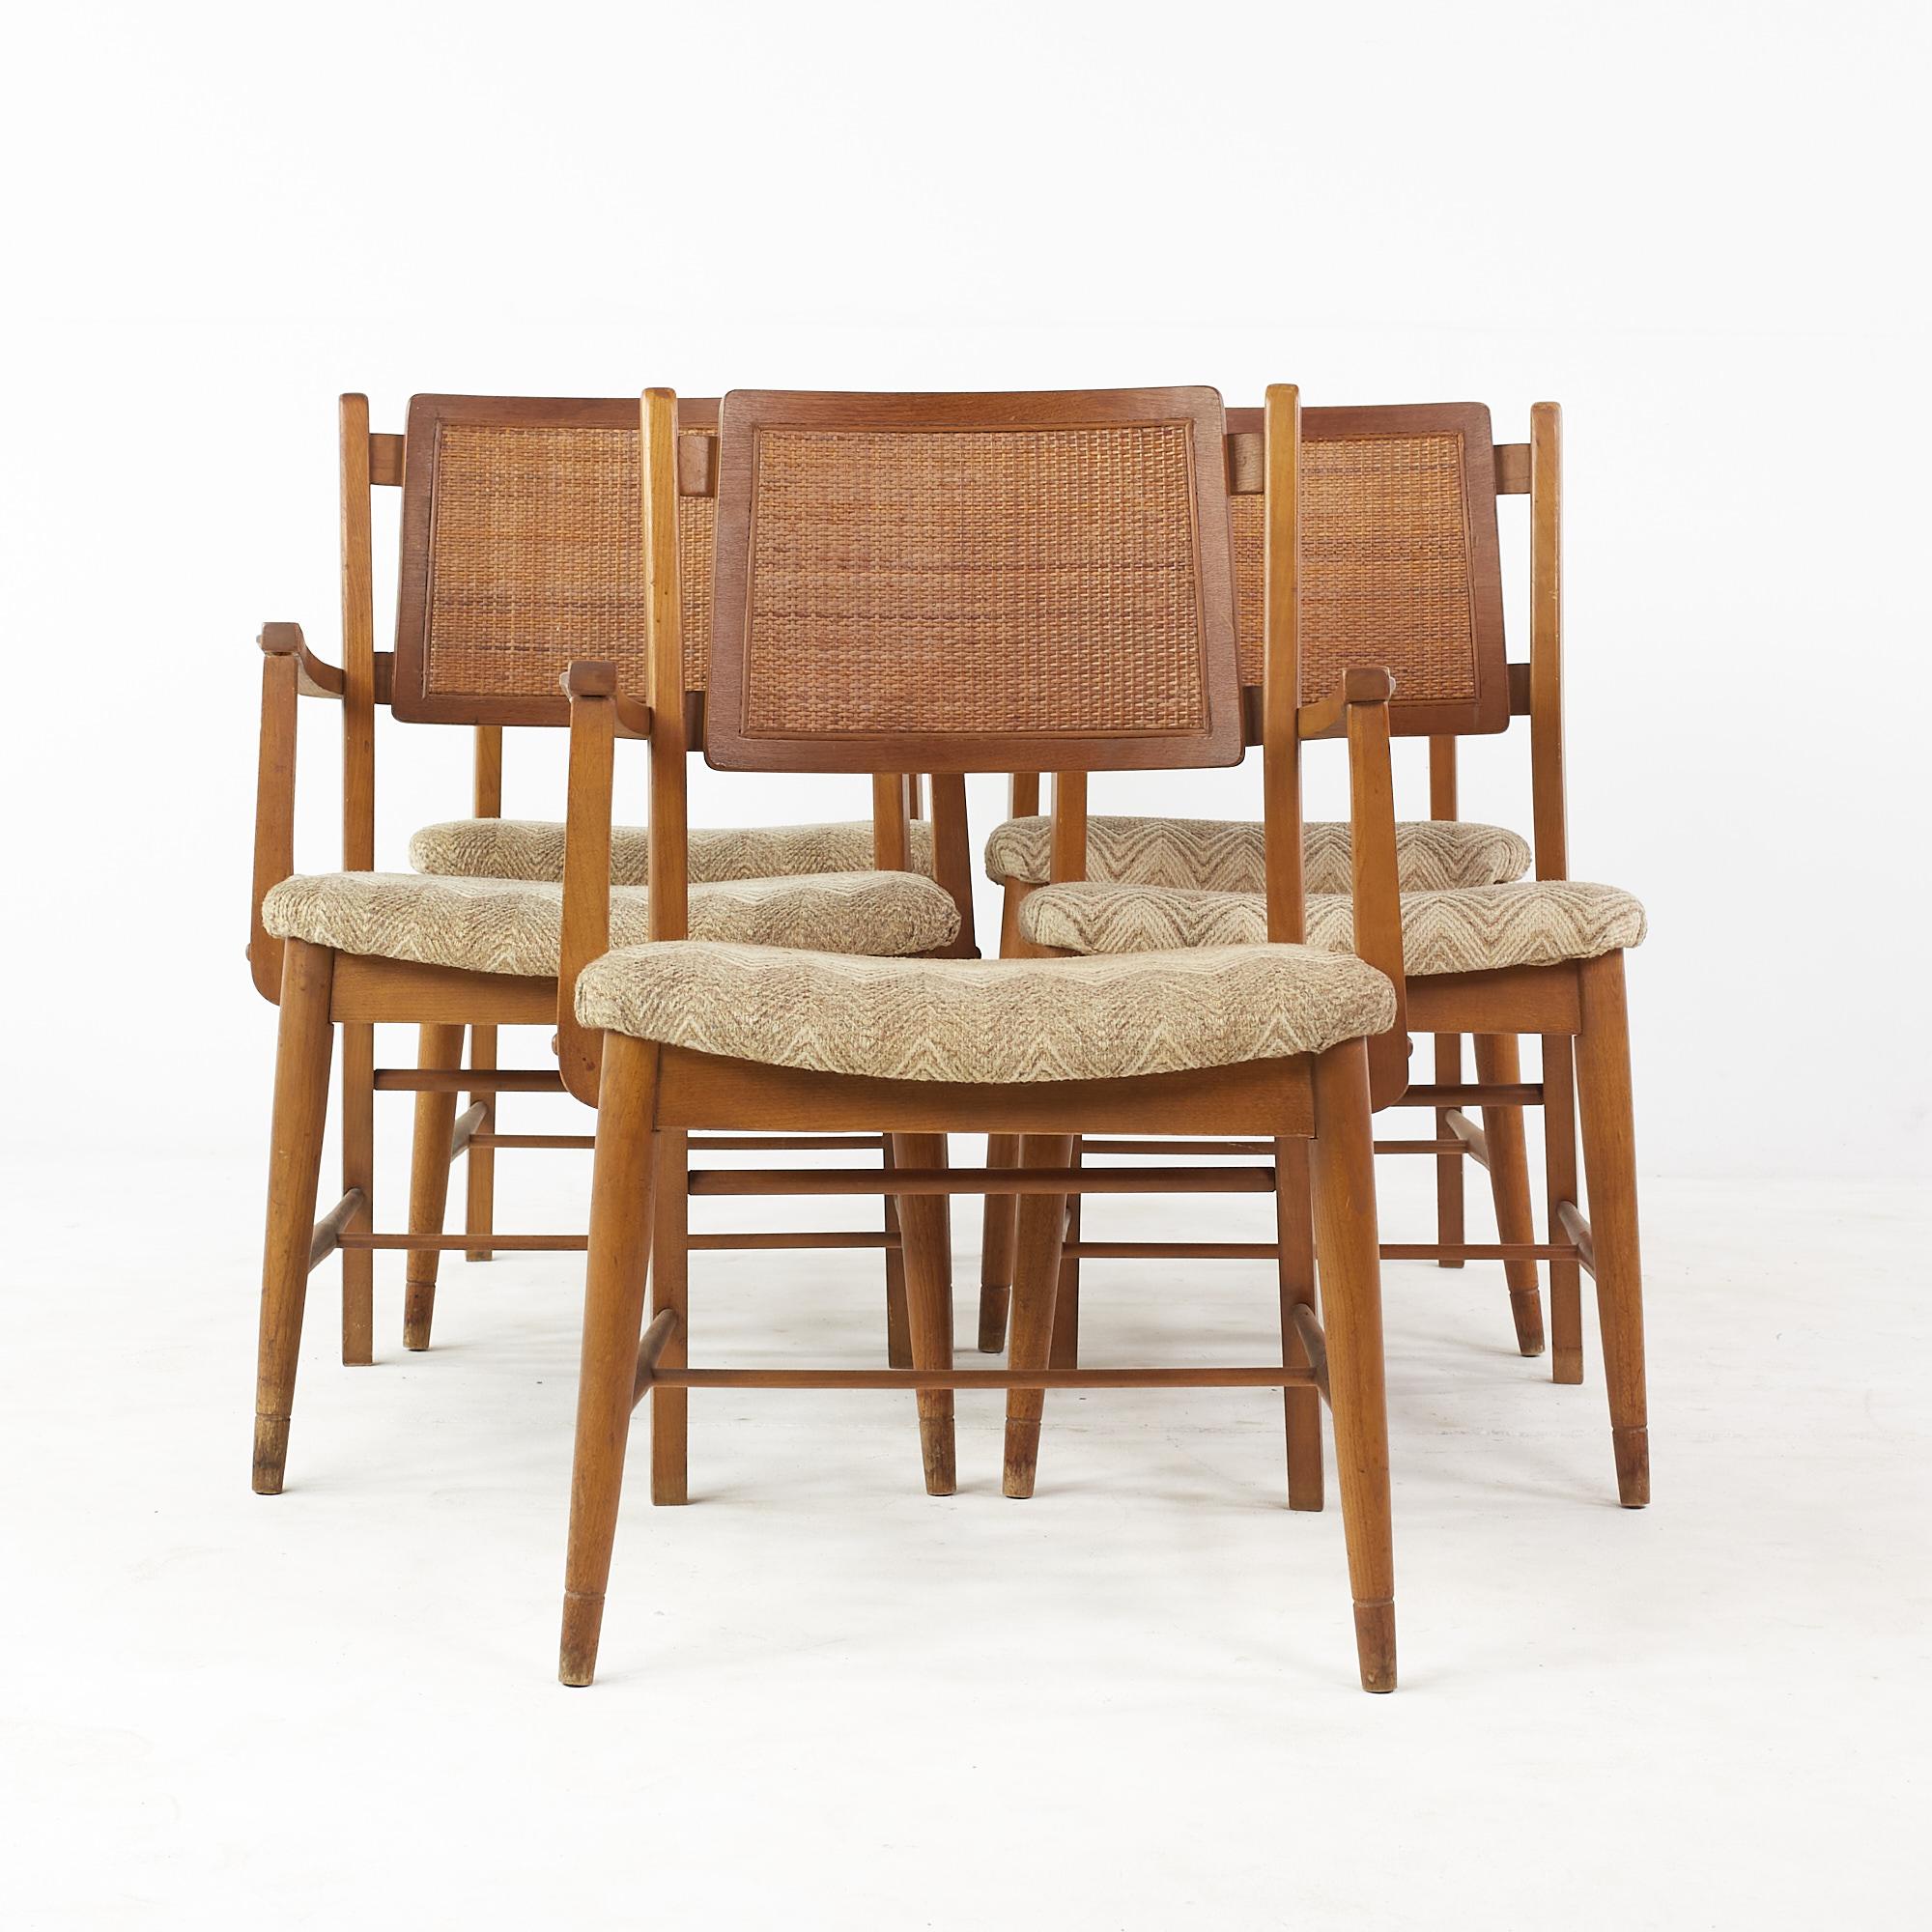 Mainline by Hookermid century walnut and cane dining chairs - set of 5

Each armless chair measures: 19.5 wide x 21 deep x 33 high, with a seat height of 17.5 inches
Each captains chair measures: 22.5 wide x 21 deep x 33 high, with a seat height